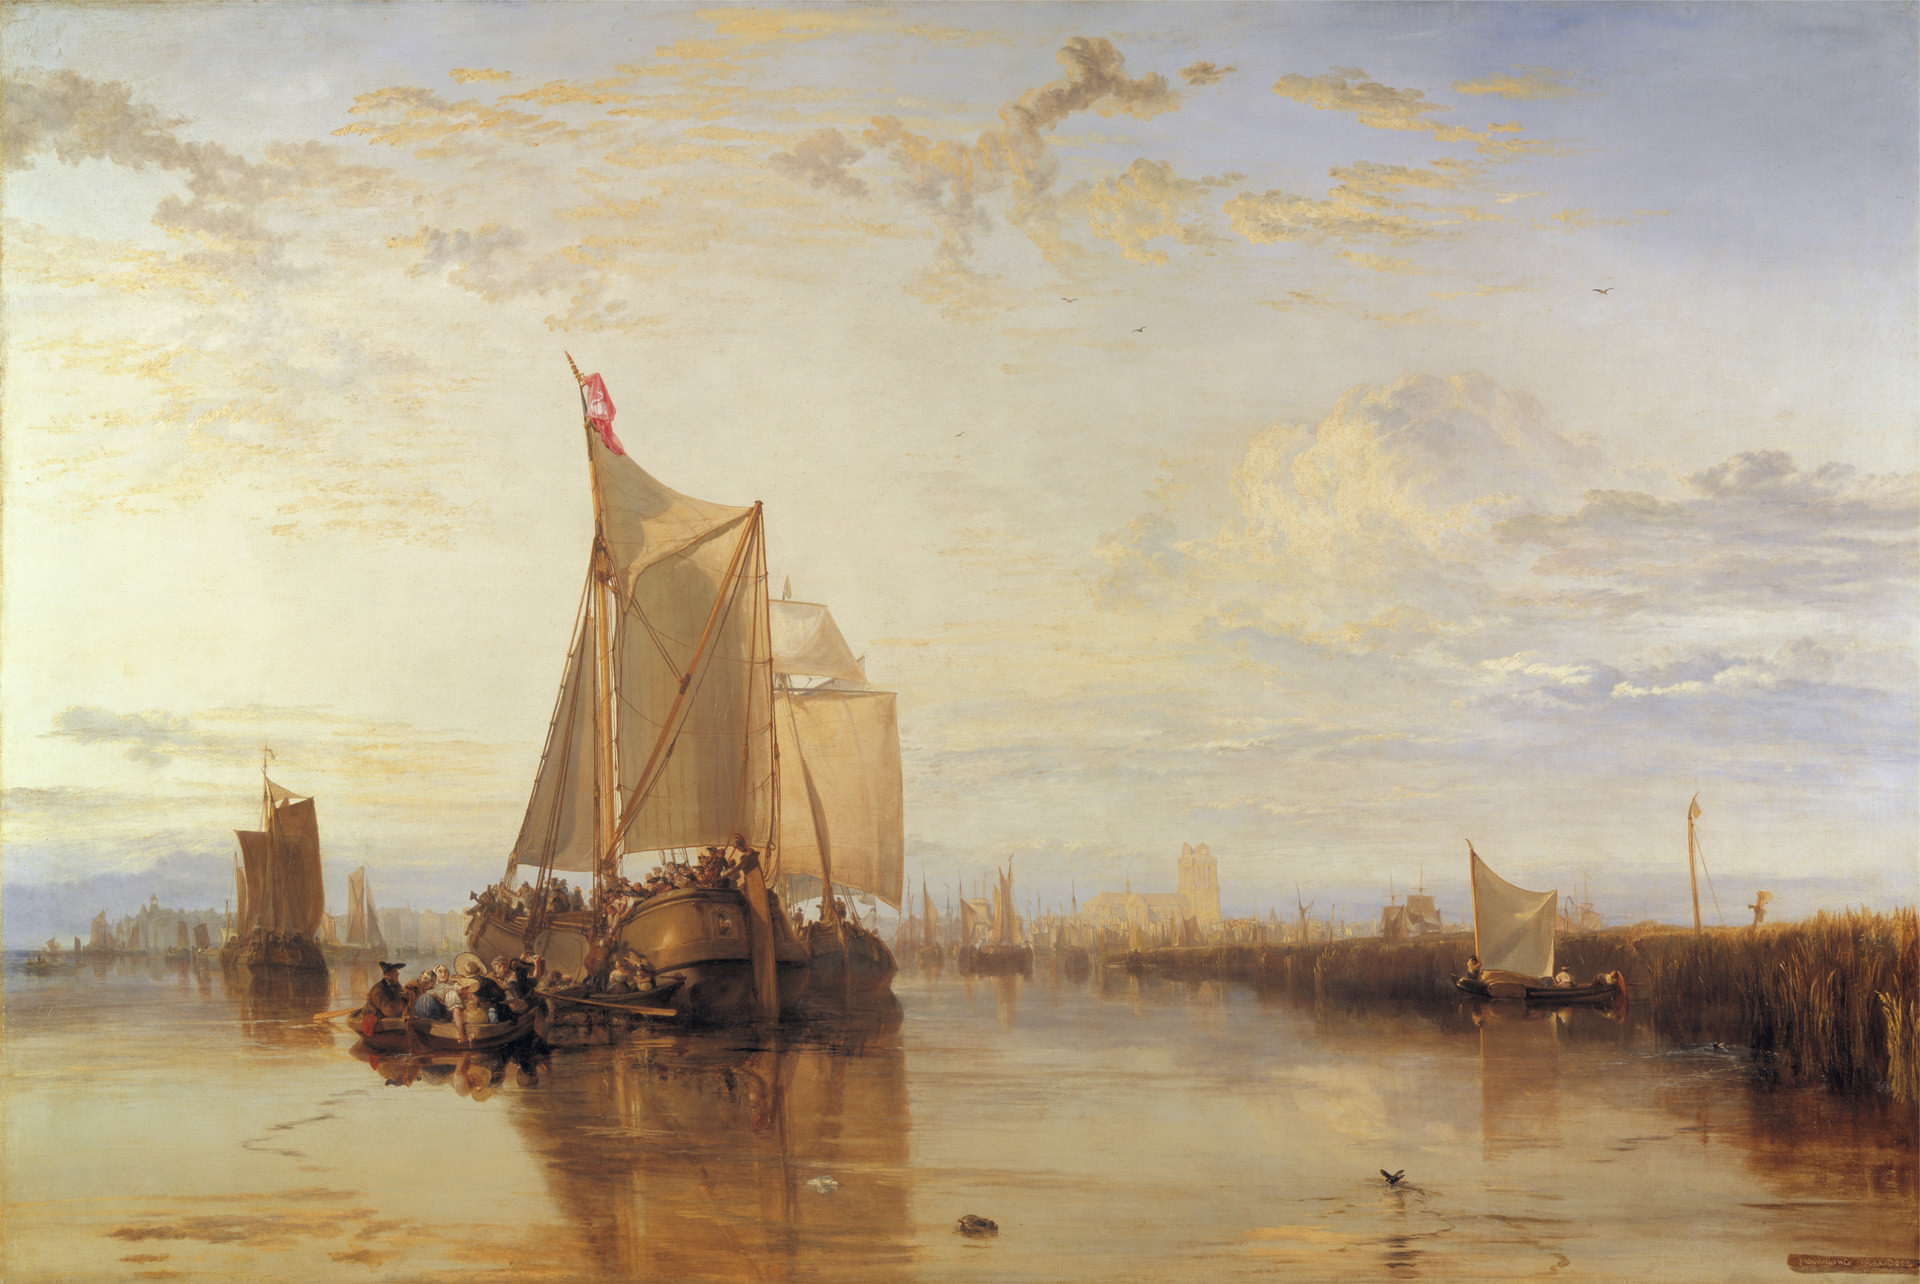 Gallery Talk, “It Almost Puts Your Eyes Out”: J.M.W. Turner’s “Dort